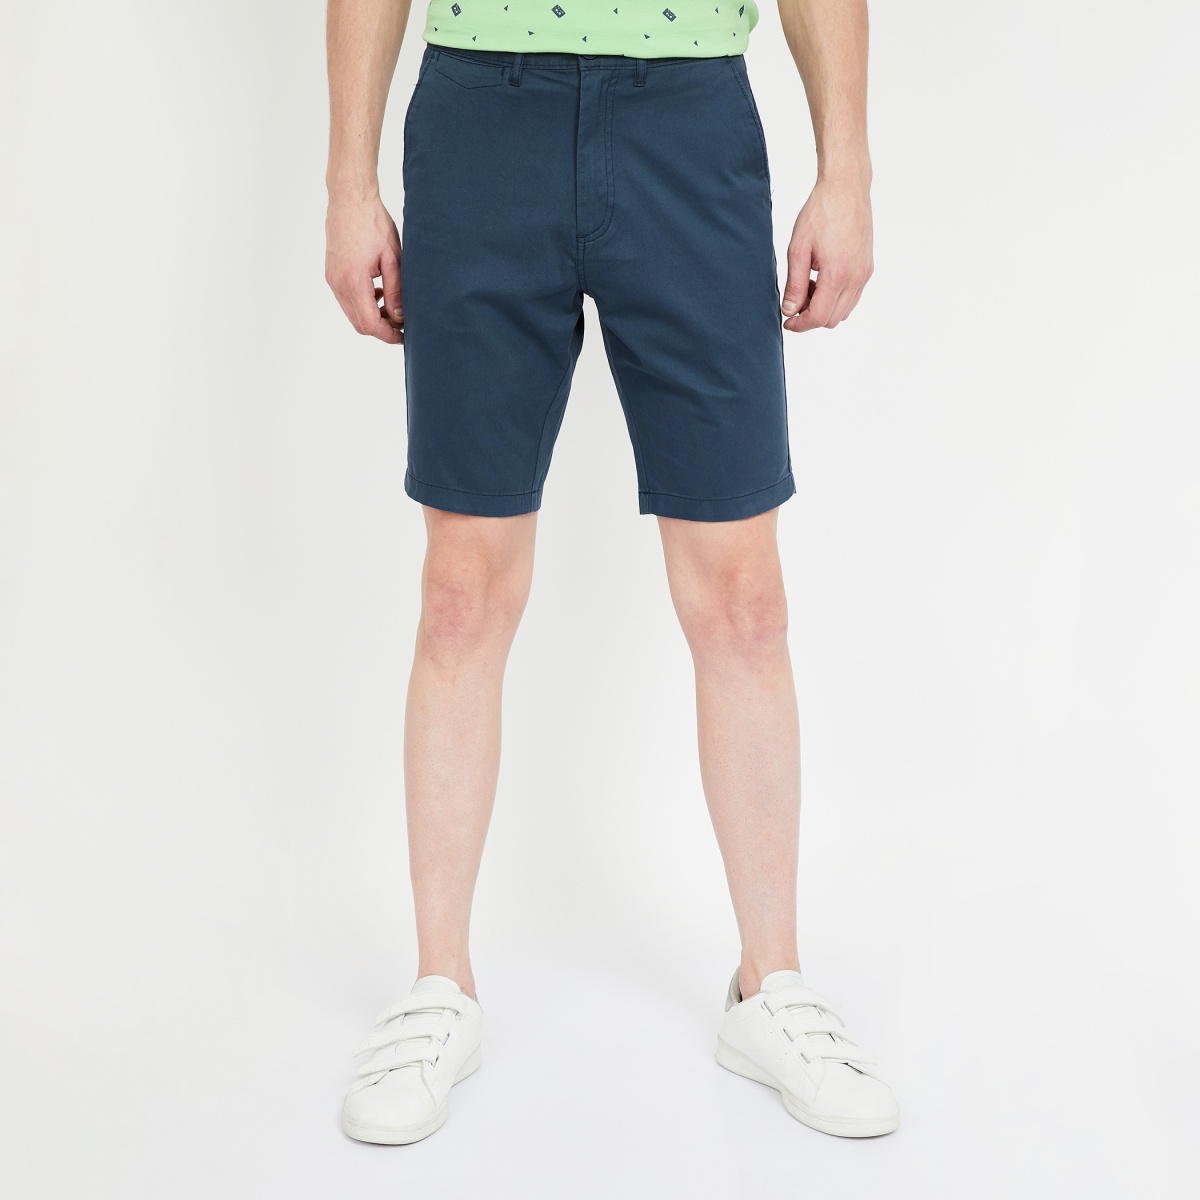 T-BASE Solid Slim Fit City Shorts